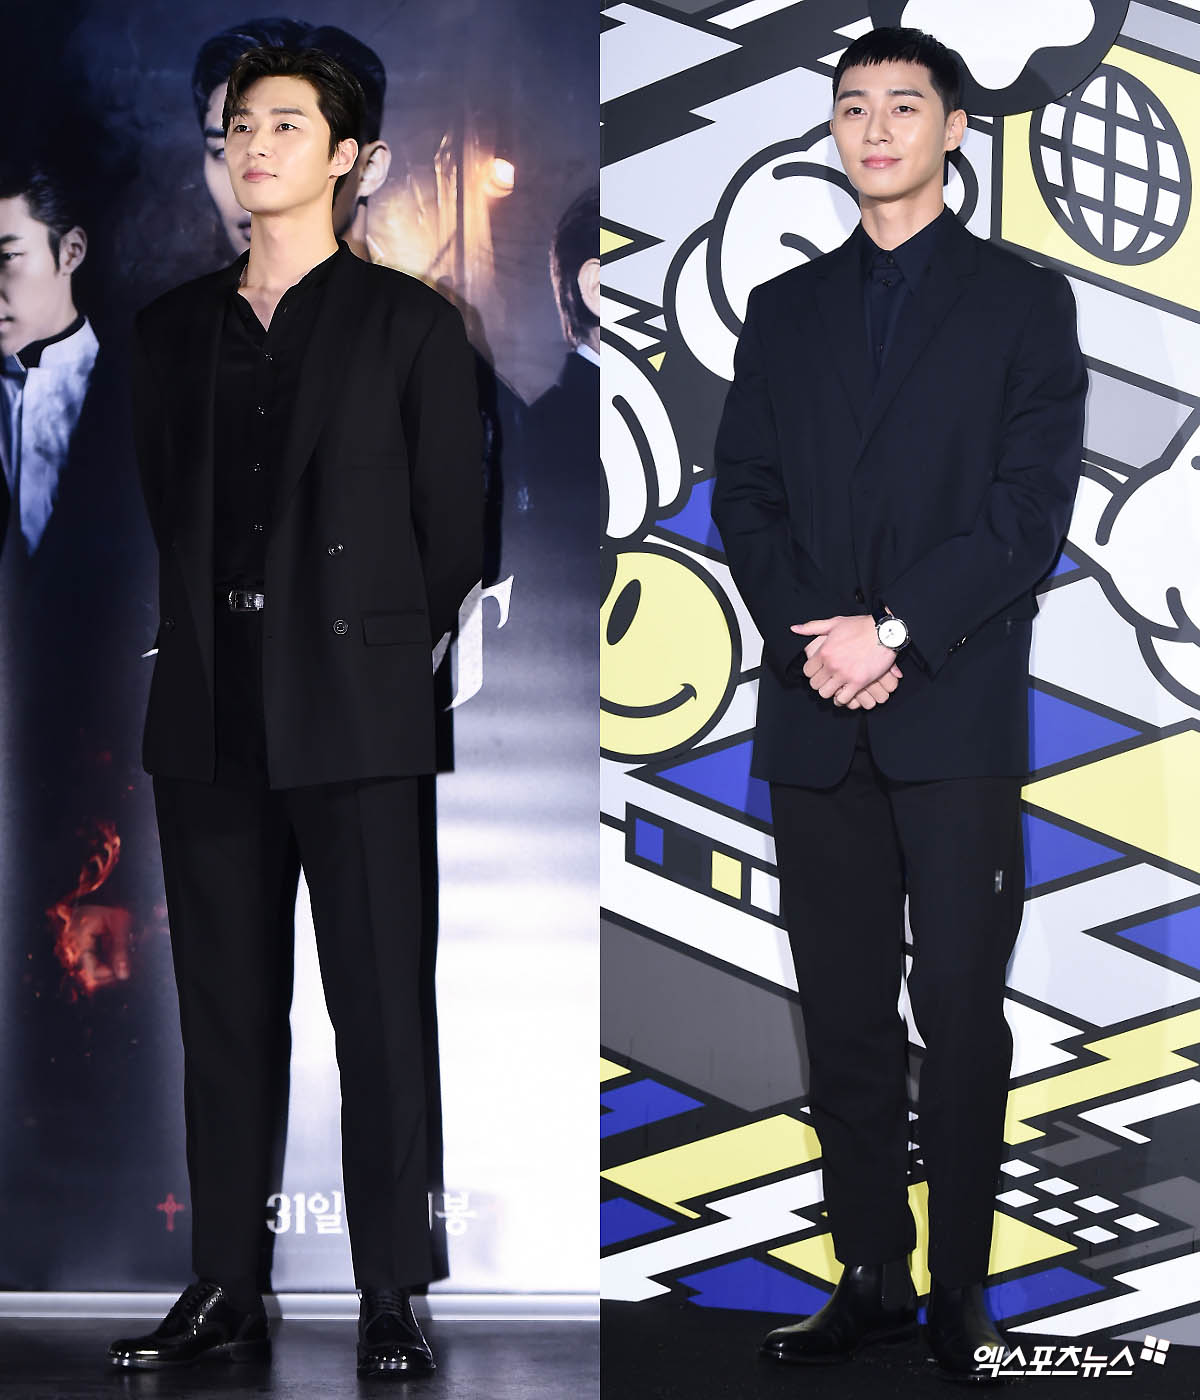 Park Seo-joon, who has recently performed as a single-night boss Bak Sae-roi in JTBCs Drama One Clath and is sweeping TV viewer ratings and topics.He has shown numerous fashions in the official ceremony: the fashion that maximizes the coolness of Park Seo-joon, who has a warm appearance and a height of 185 centimeters and a sculpture-like figure, is also a suit.I gathered the suit fashion worn in the official appearance of Park Seo-joon, which showed a tight suit fit as if showing that the completion of fashion is body.